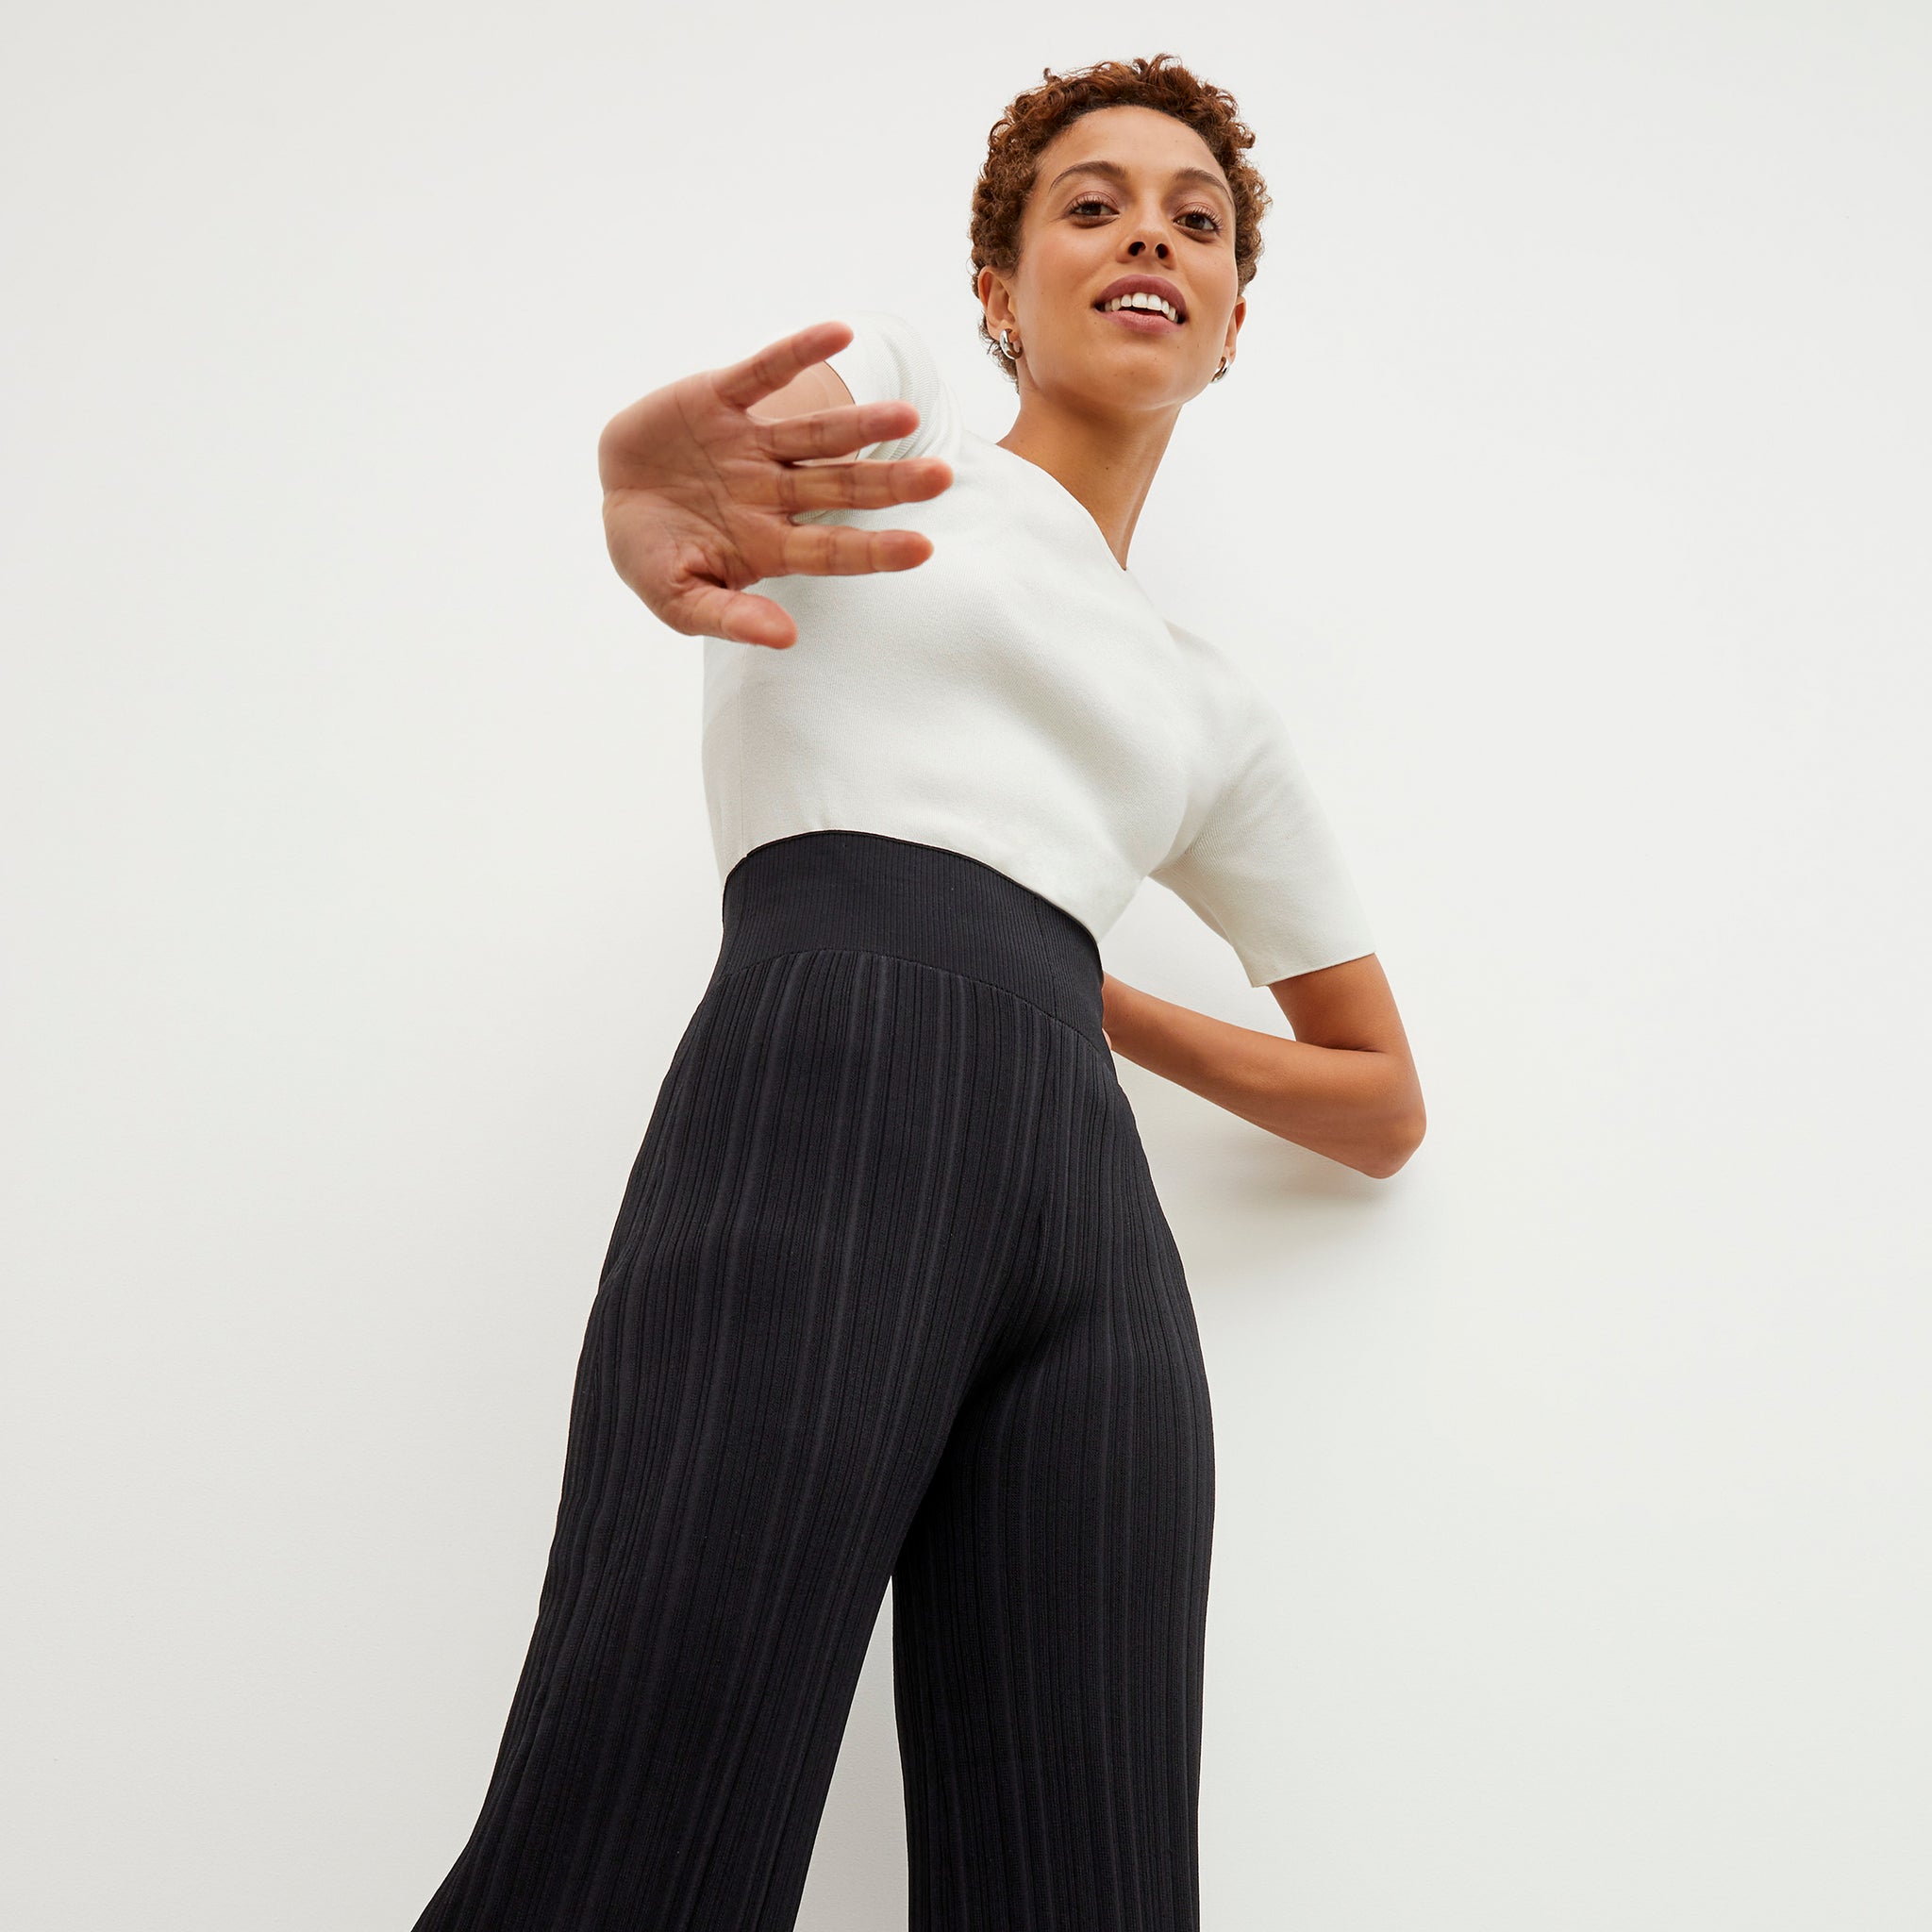 Detail image of a woman wearing the Marijane Pant - Textured Knit in Black